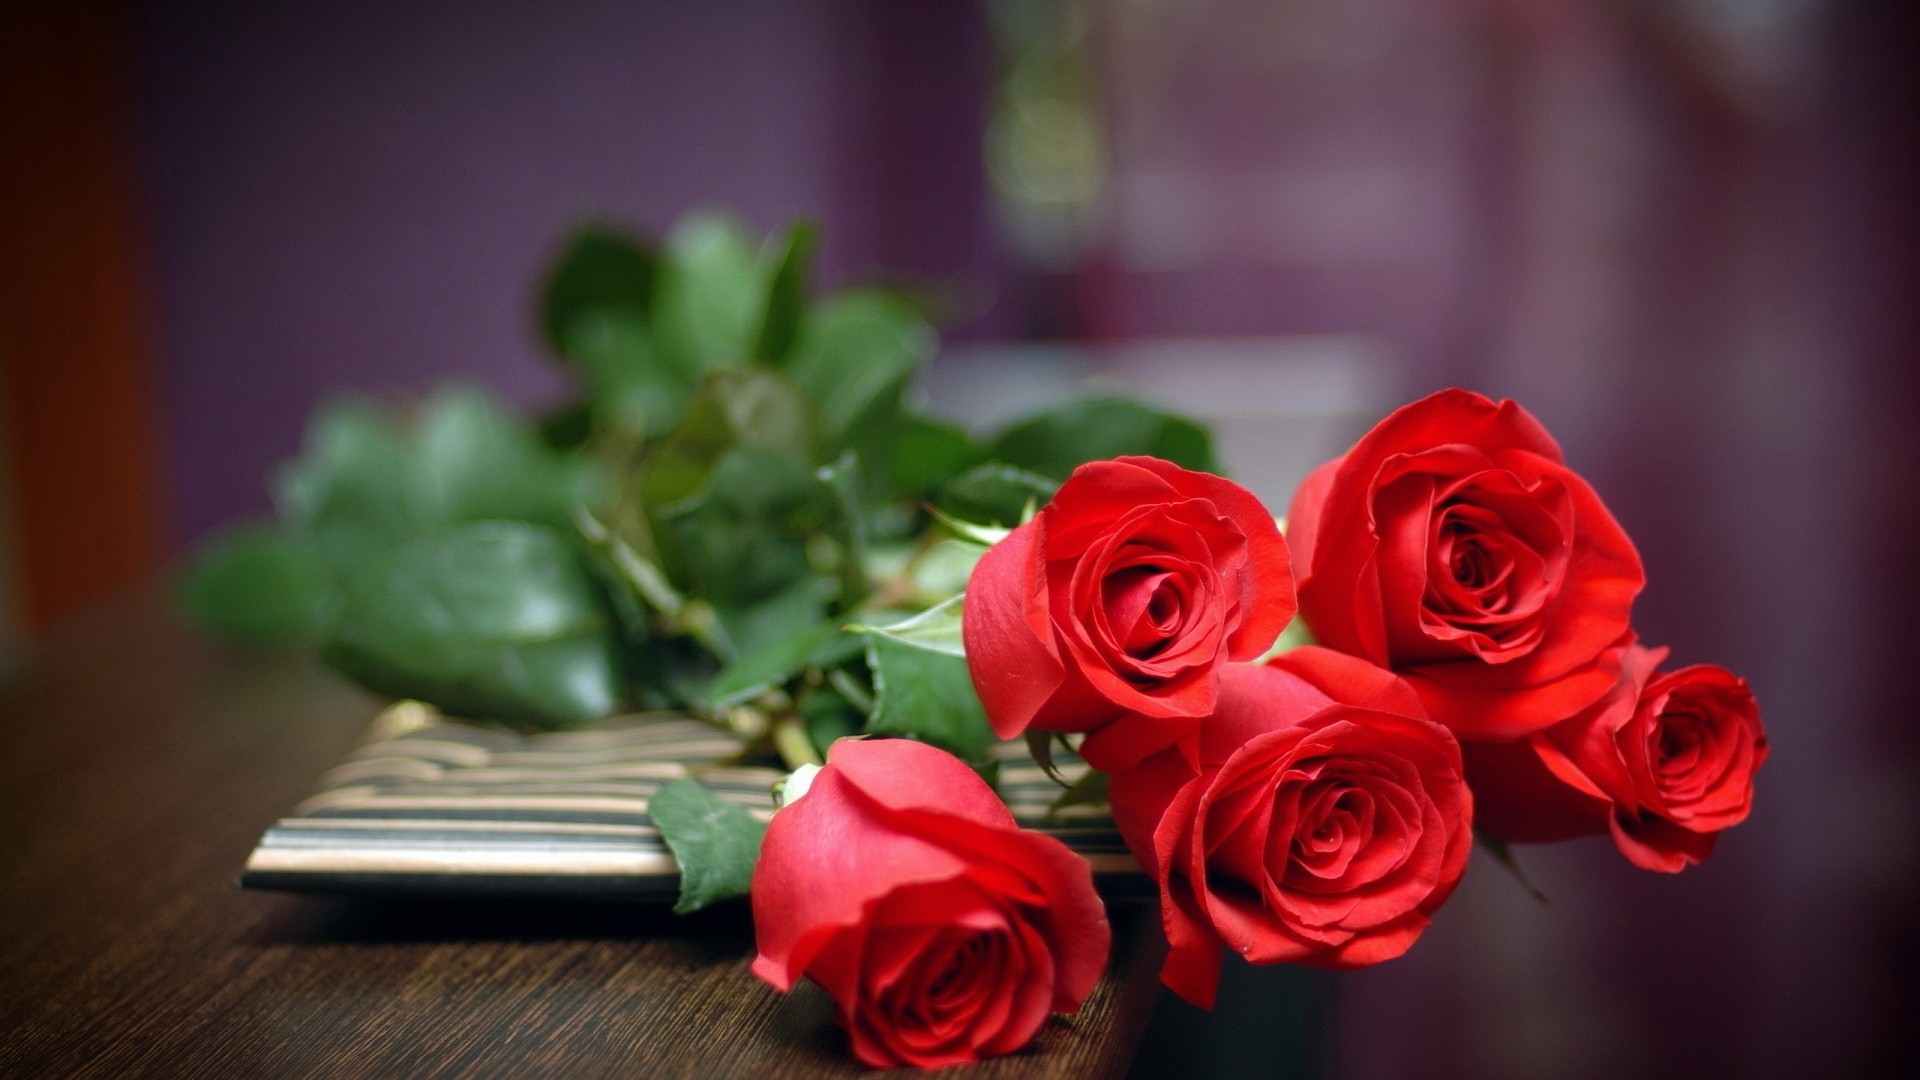 1920x1080 Red roses on table HD wallpaper